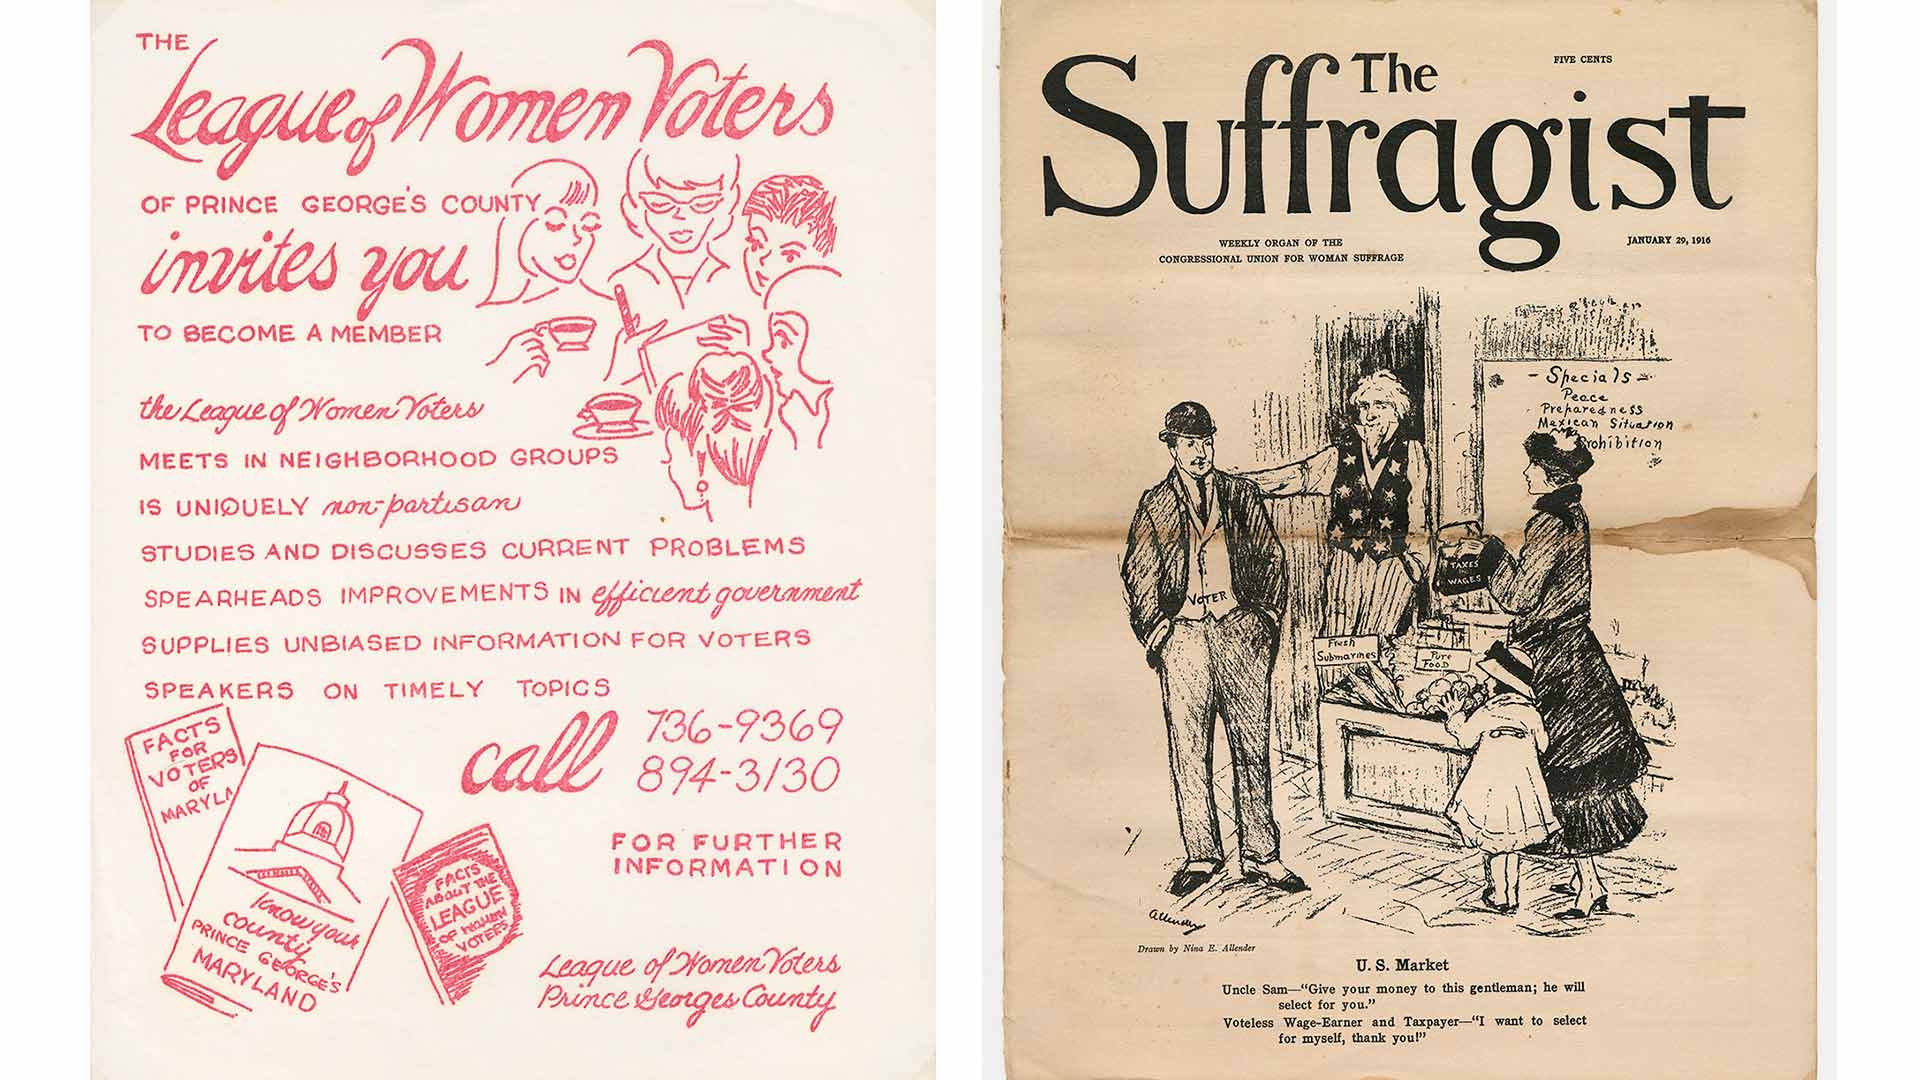 League of Women Voters invitations and The Suffragist 